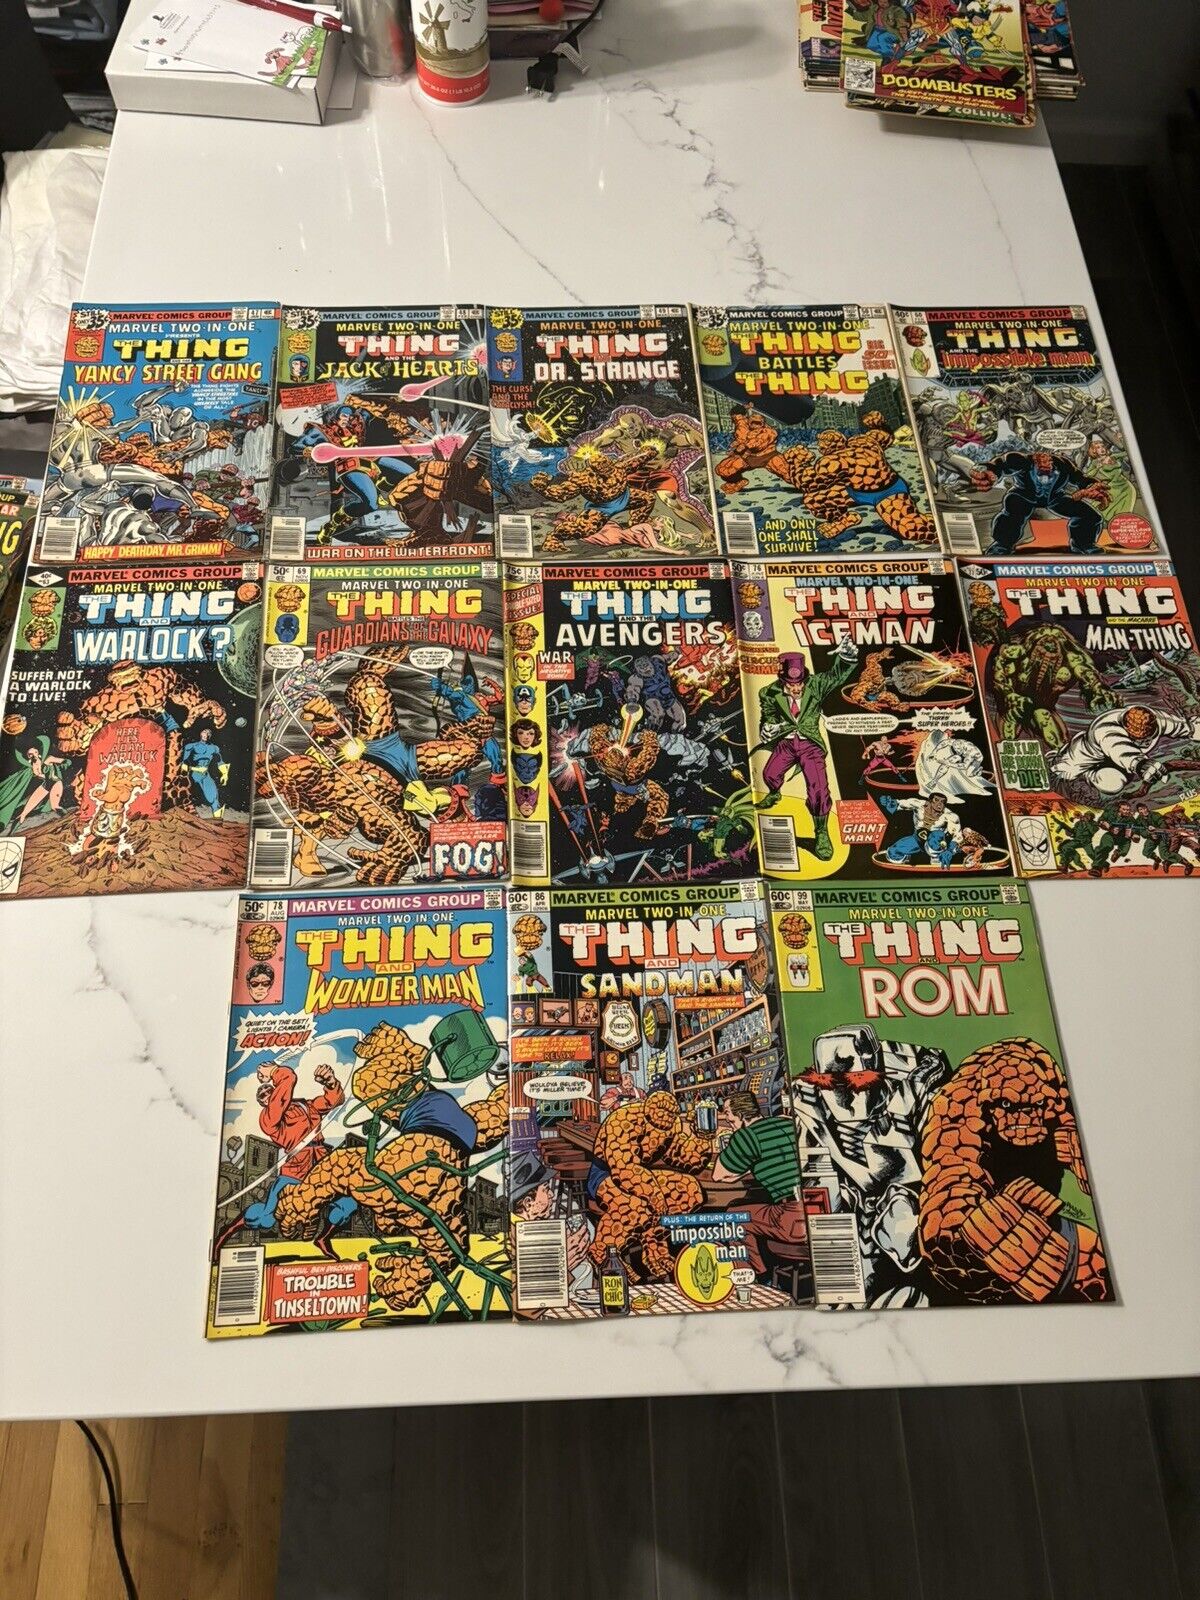 Marvel Two-In-One Comic Lot 47, 48, 49, 50, 60, 63, 69, 75, 76, 77, 78, 86, 99